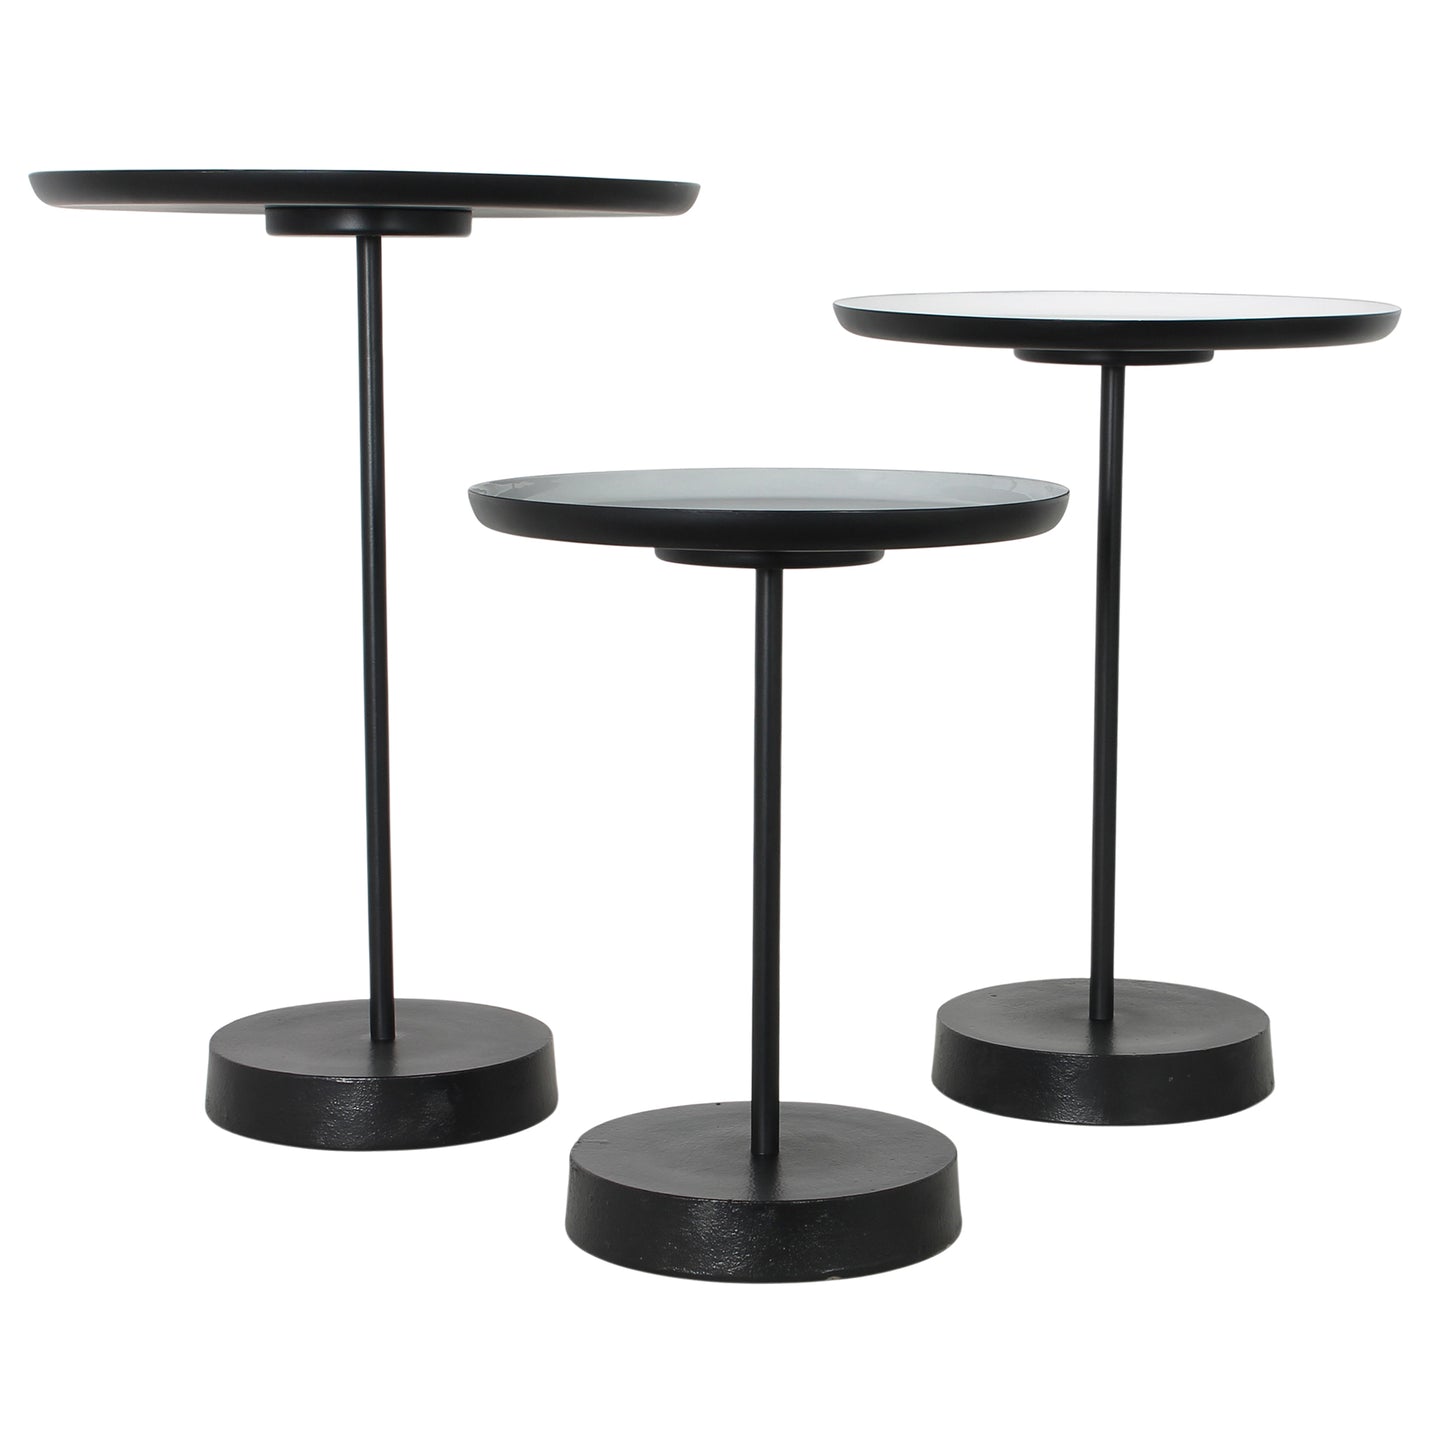 STEPPING STONE - set of 3 nesting tables